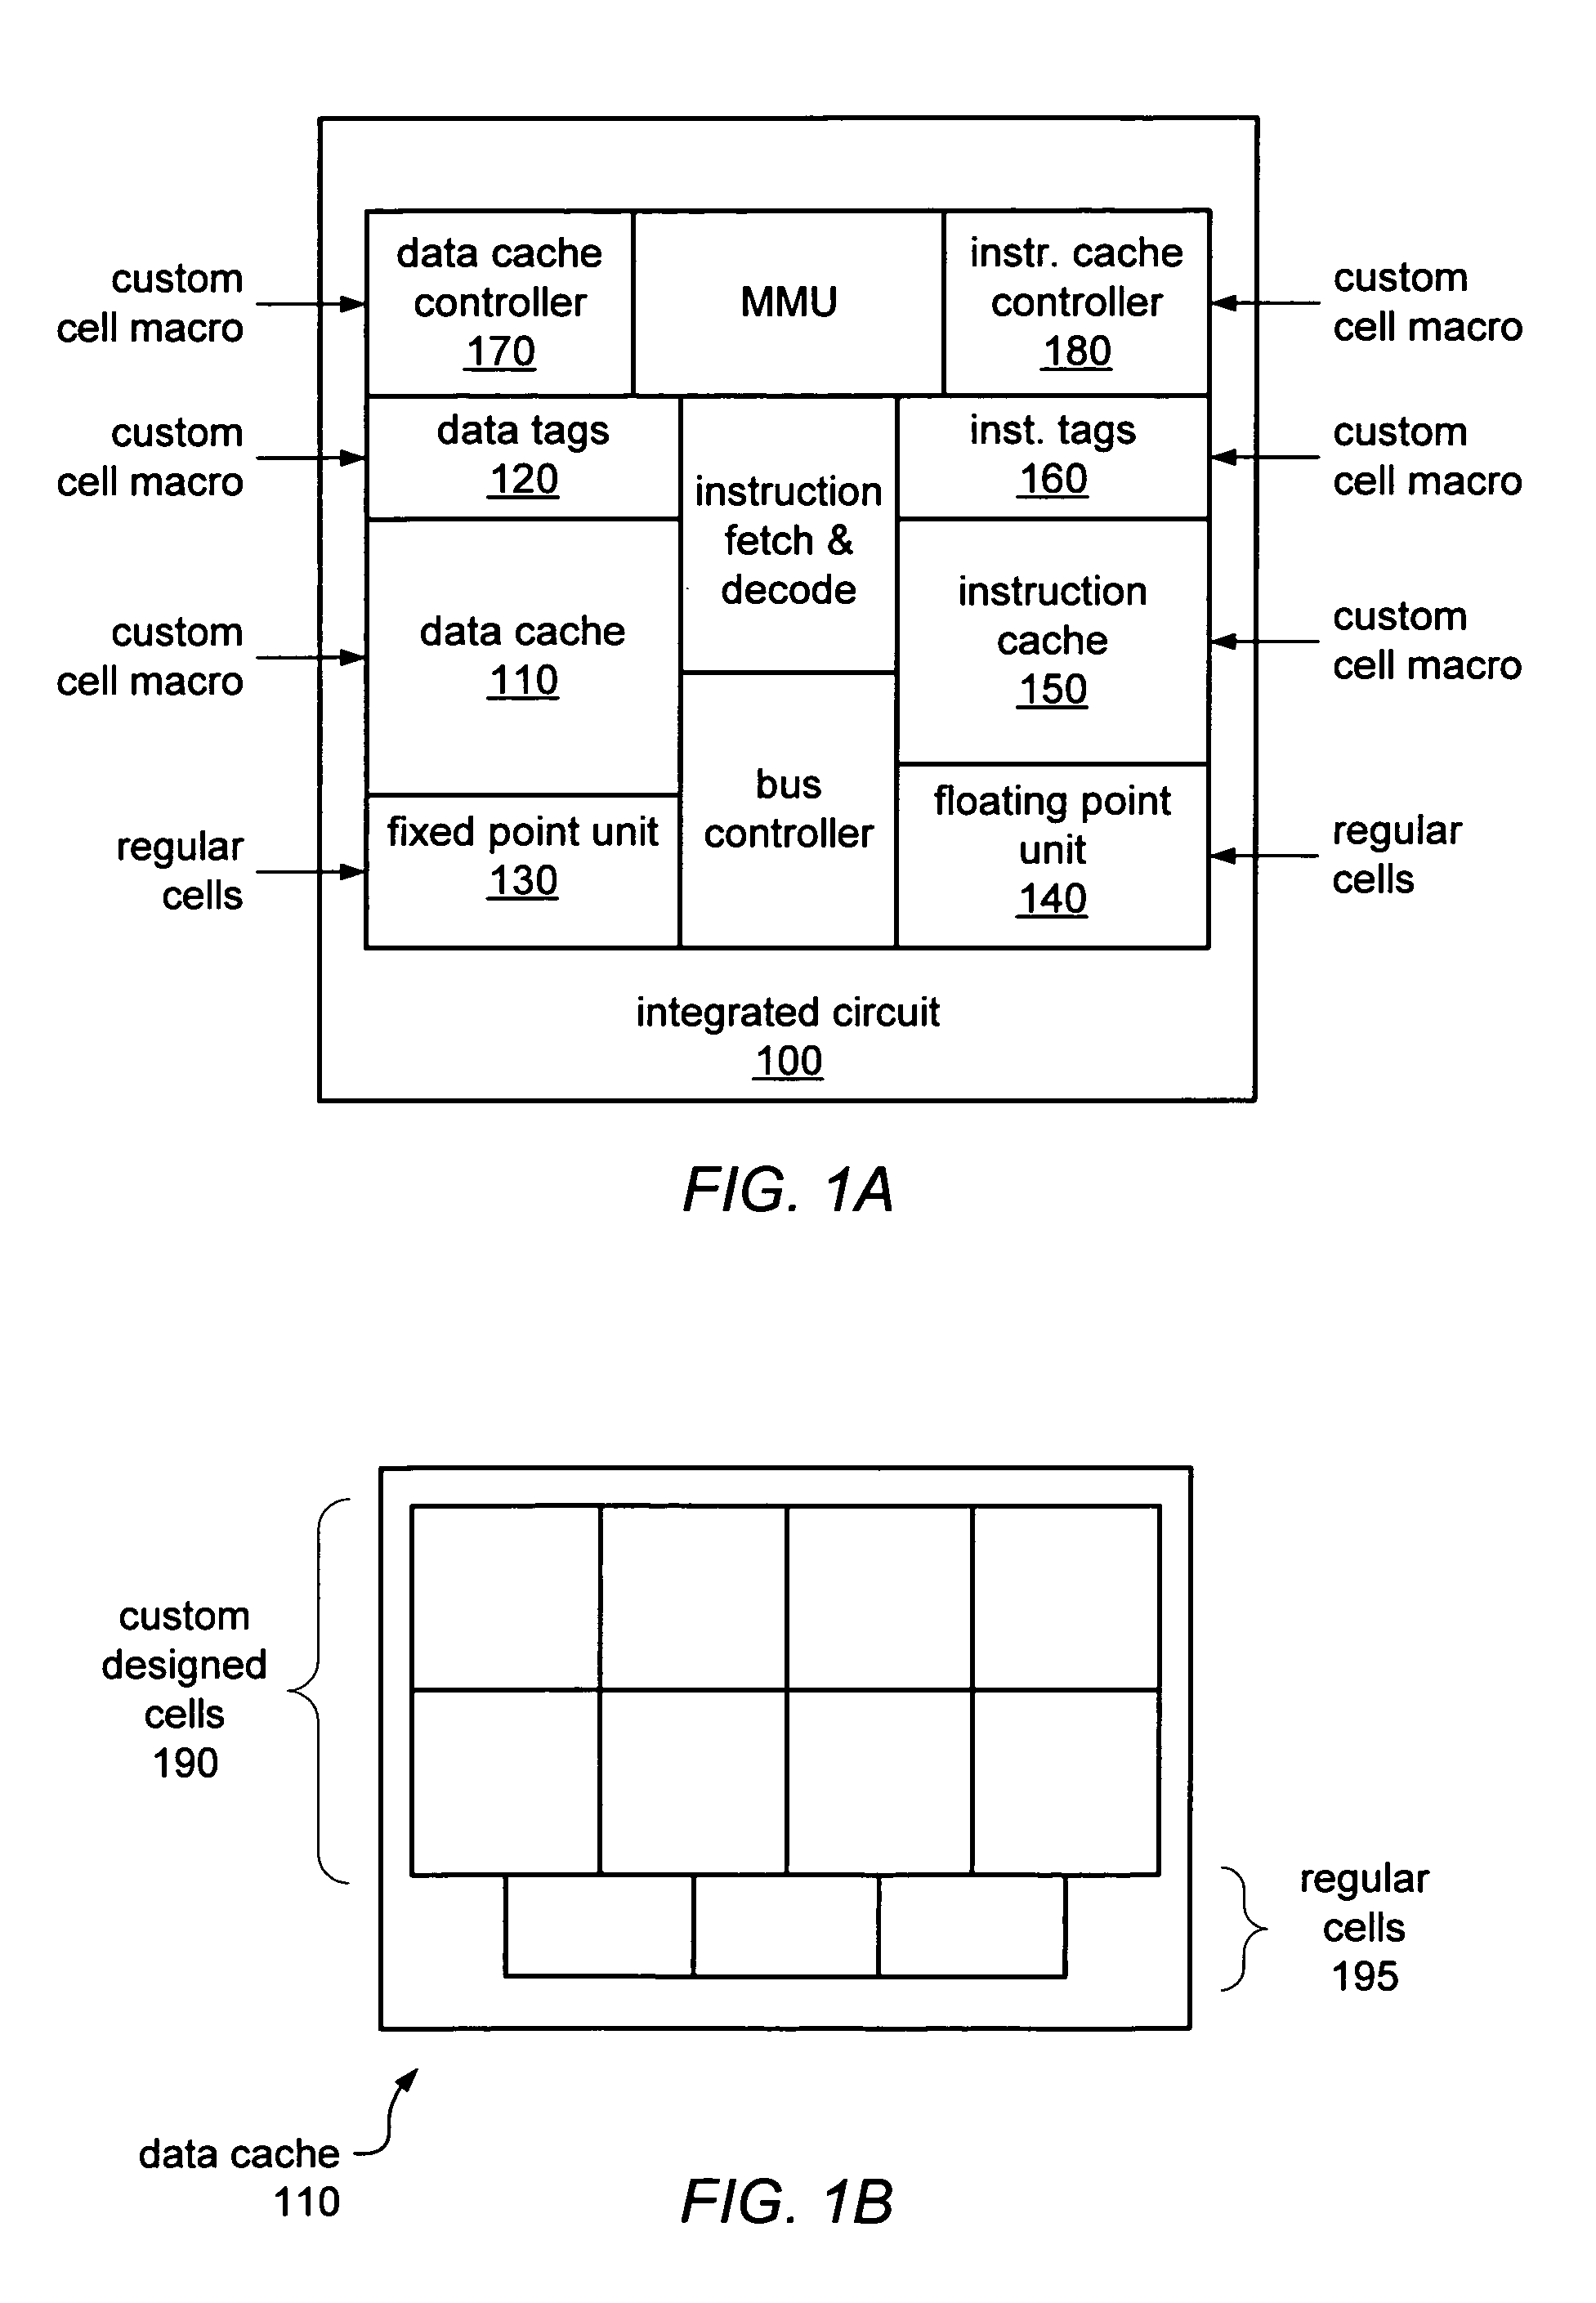 Integrated circuit design with cell-based macros